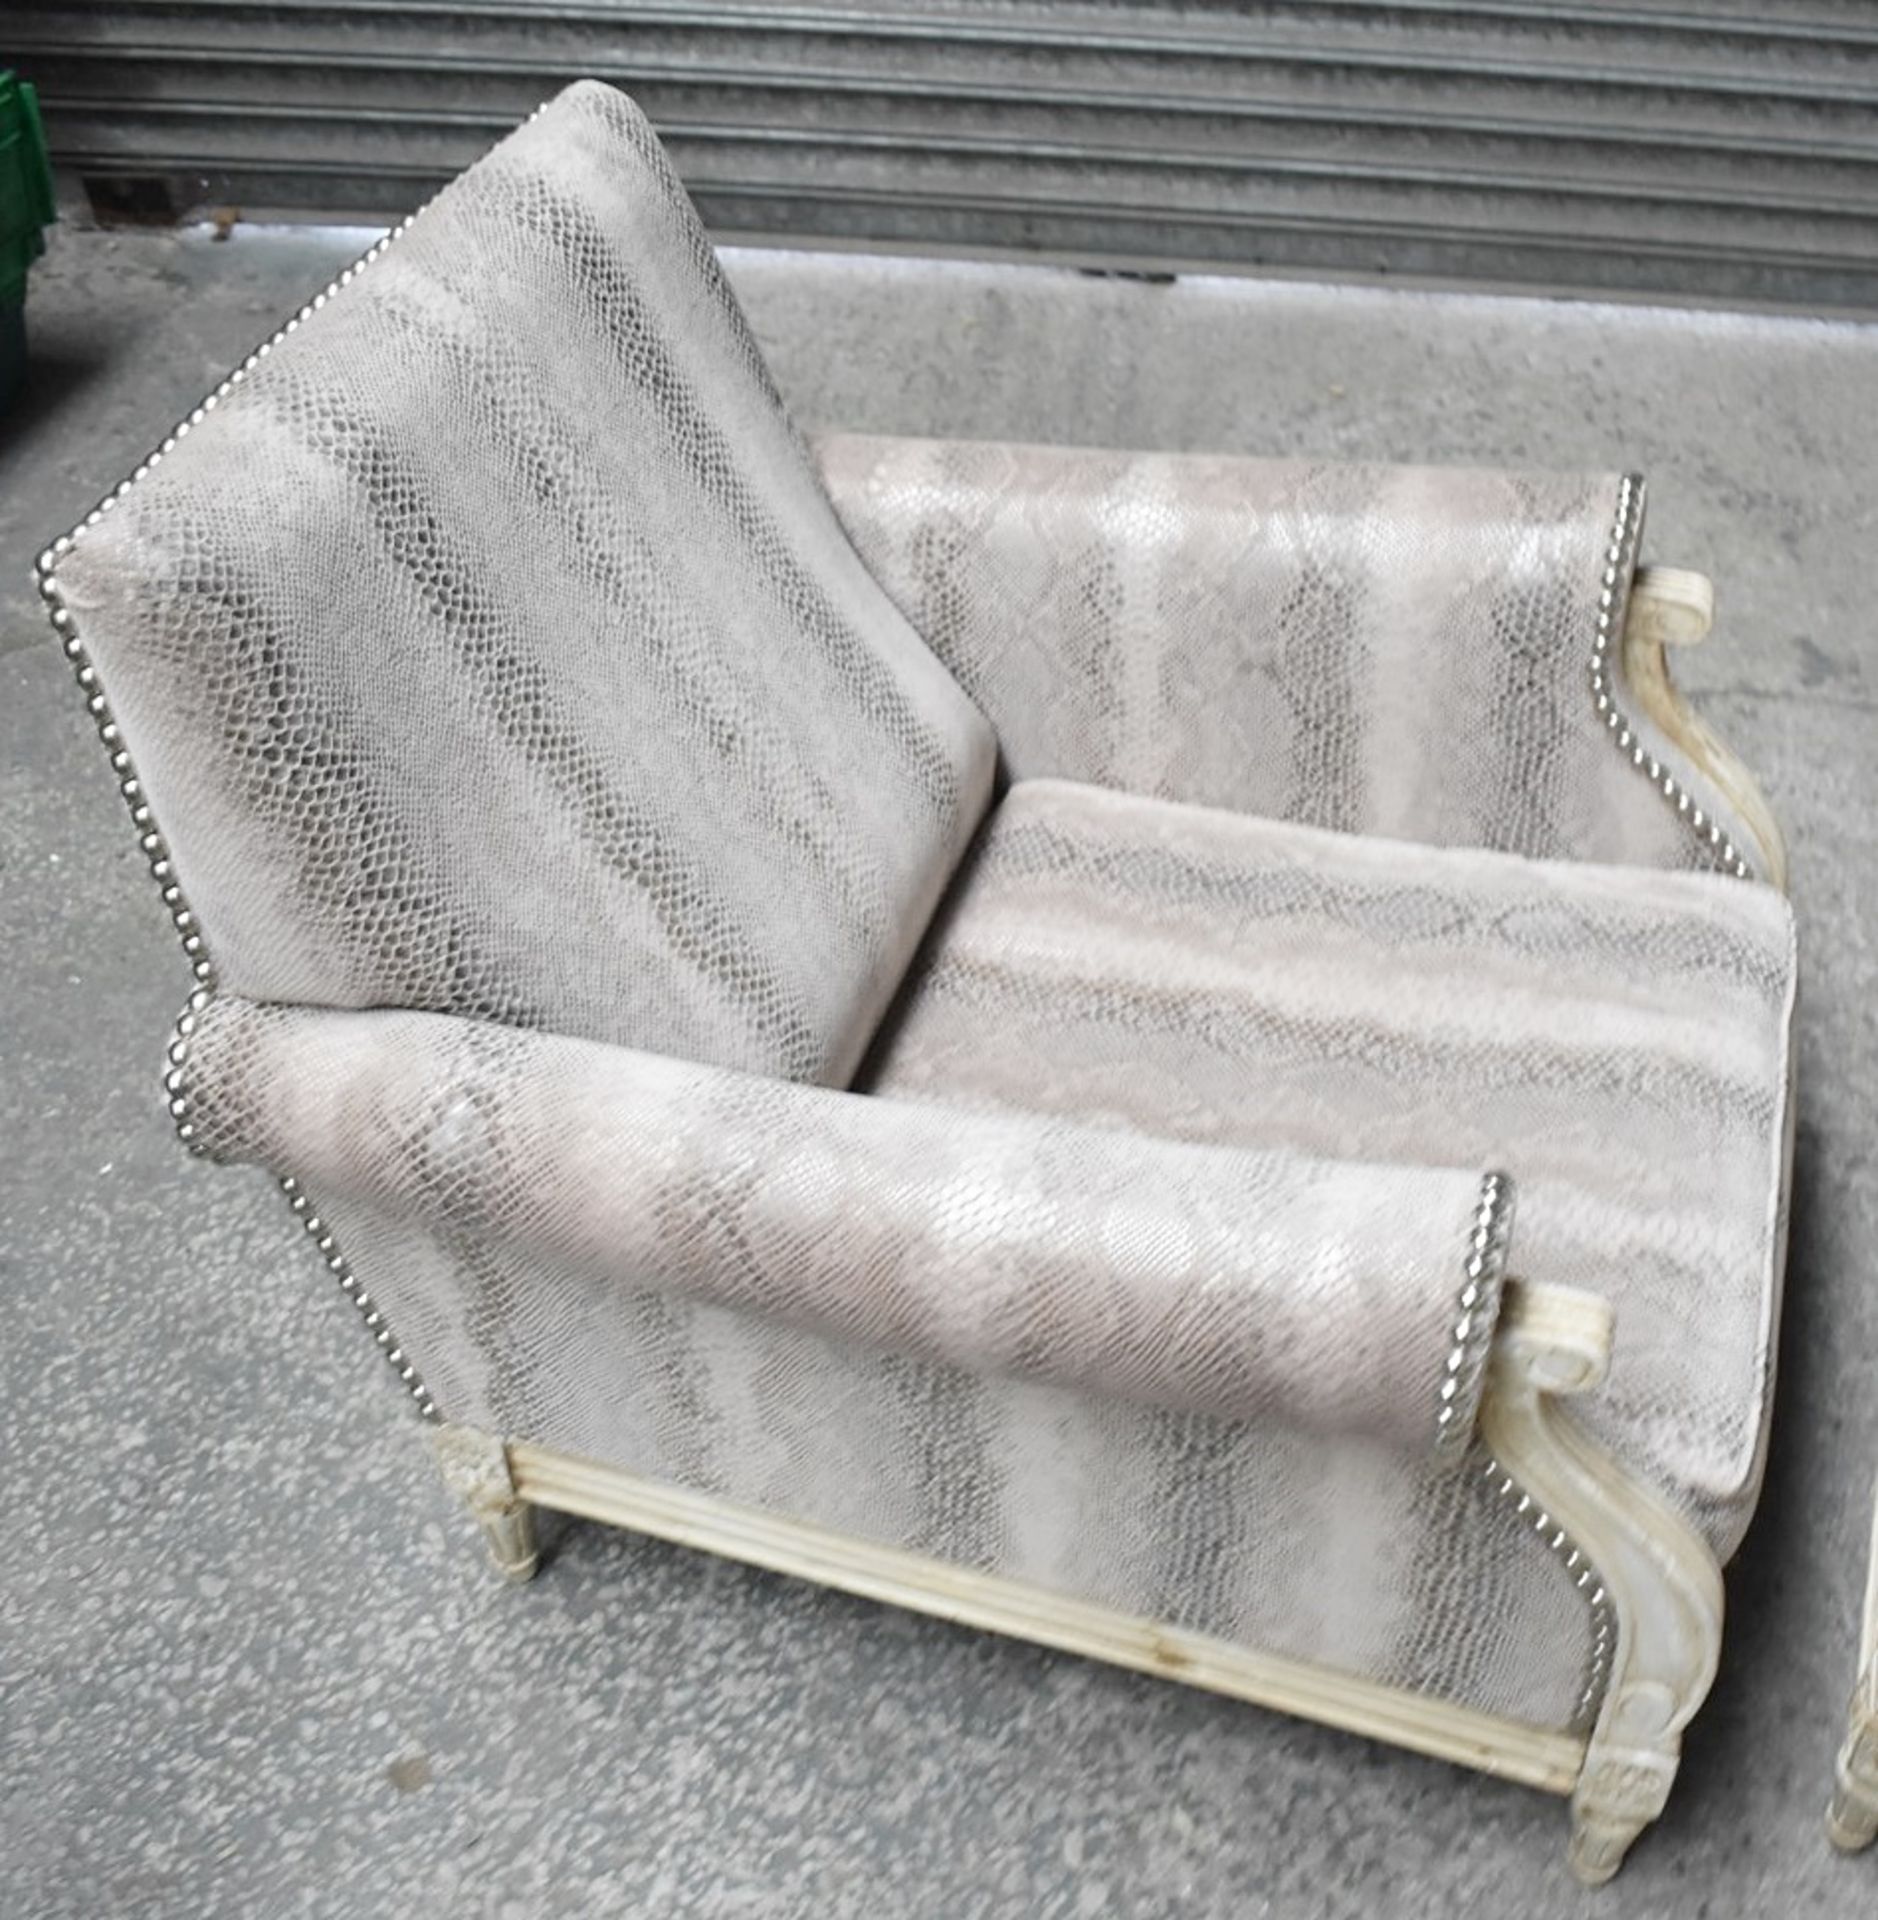 A Pair Of Bespoke Armchairs With A Matching Foot-stool, All Featuring Carved Frames, And Upholstered - Image 4 of 7